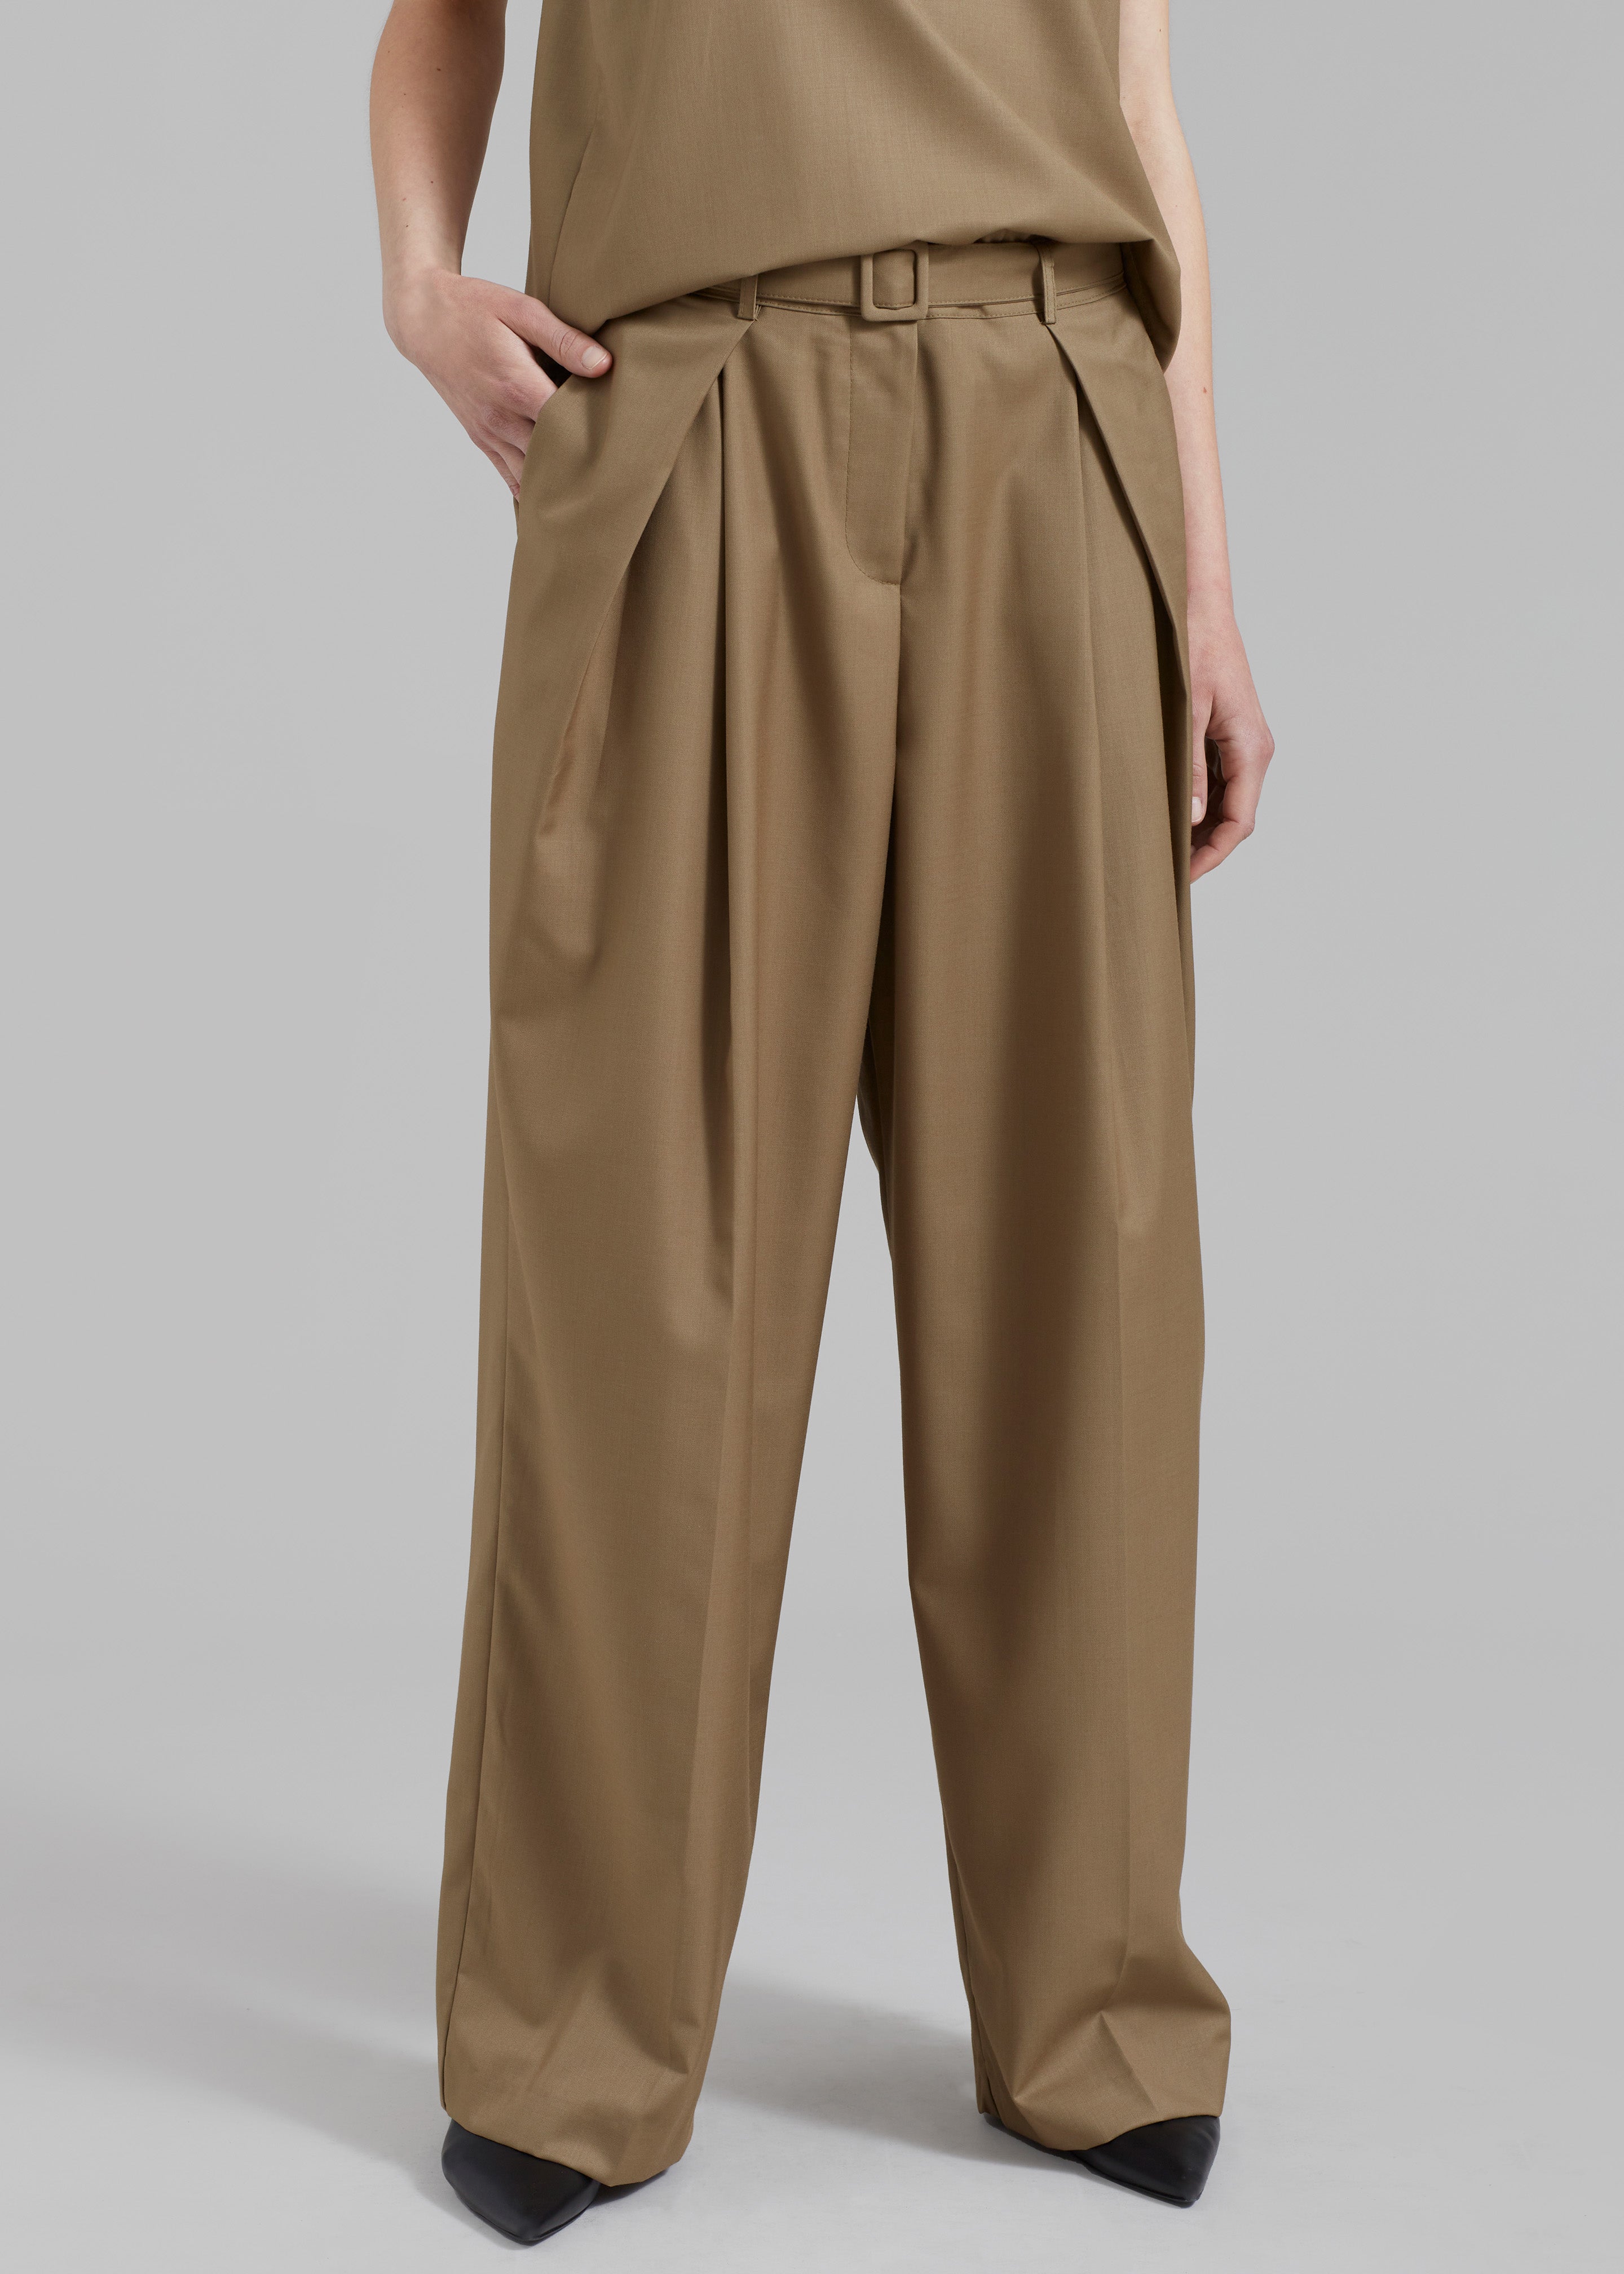 Clay Belted Pants - Desert Taupe - 10